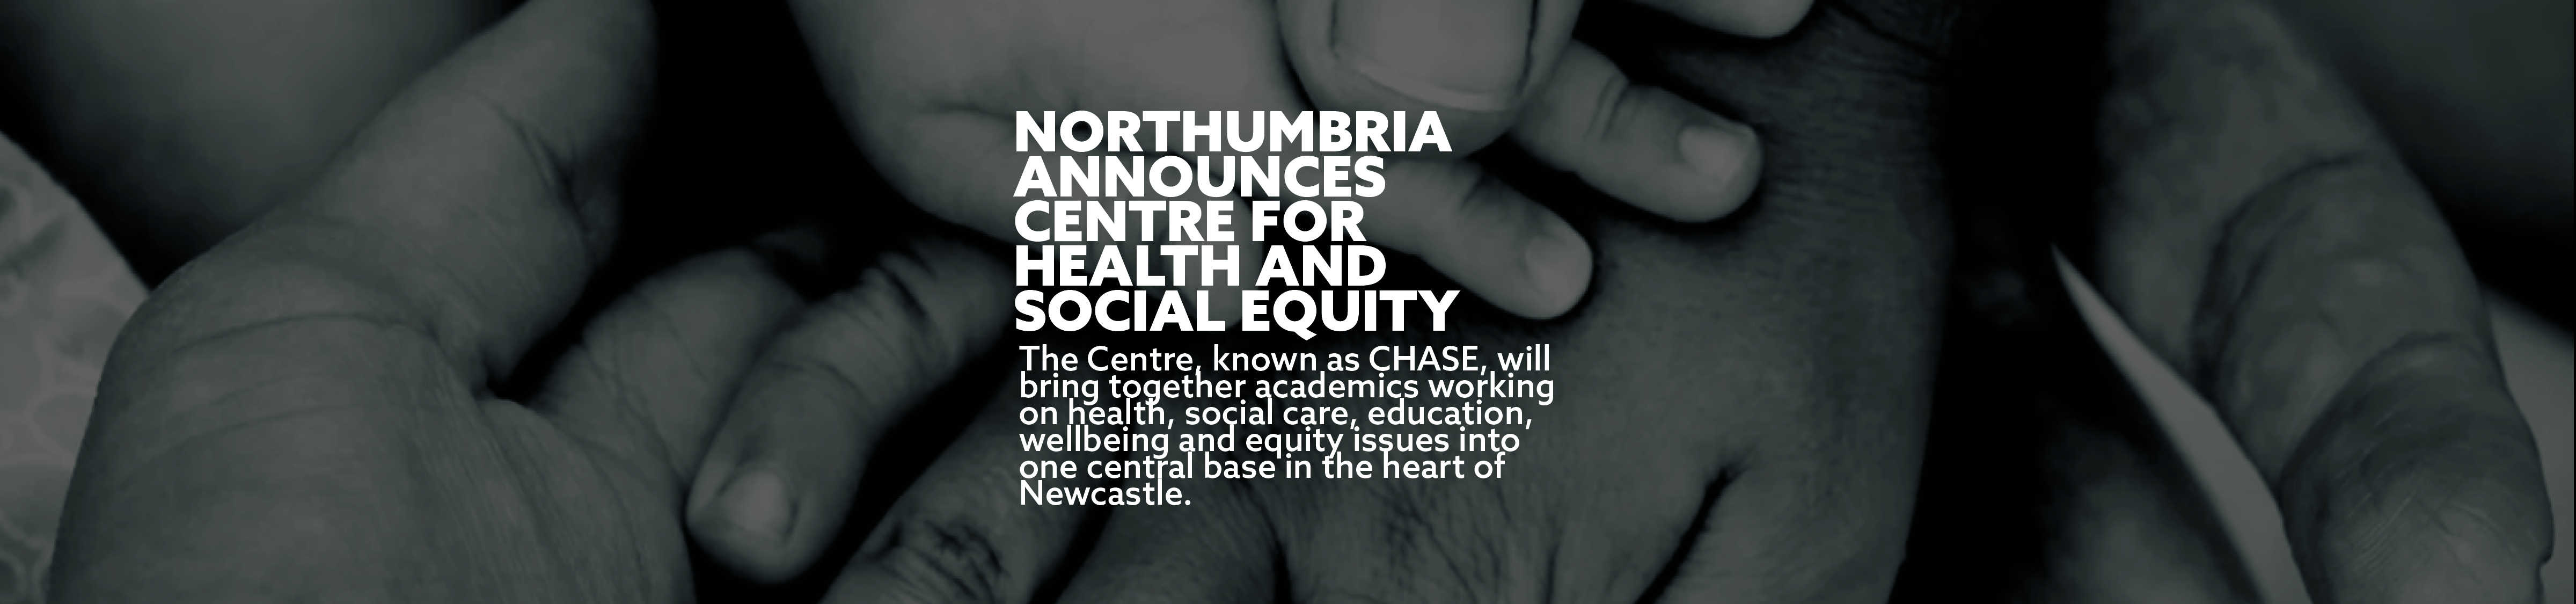 Northumbria  announces centre for health and social equity